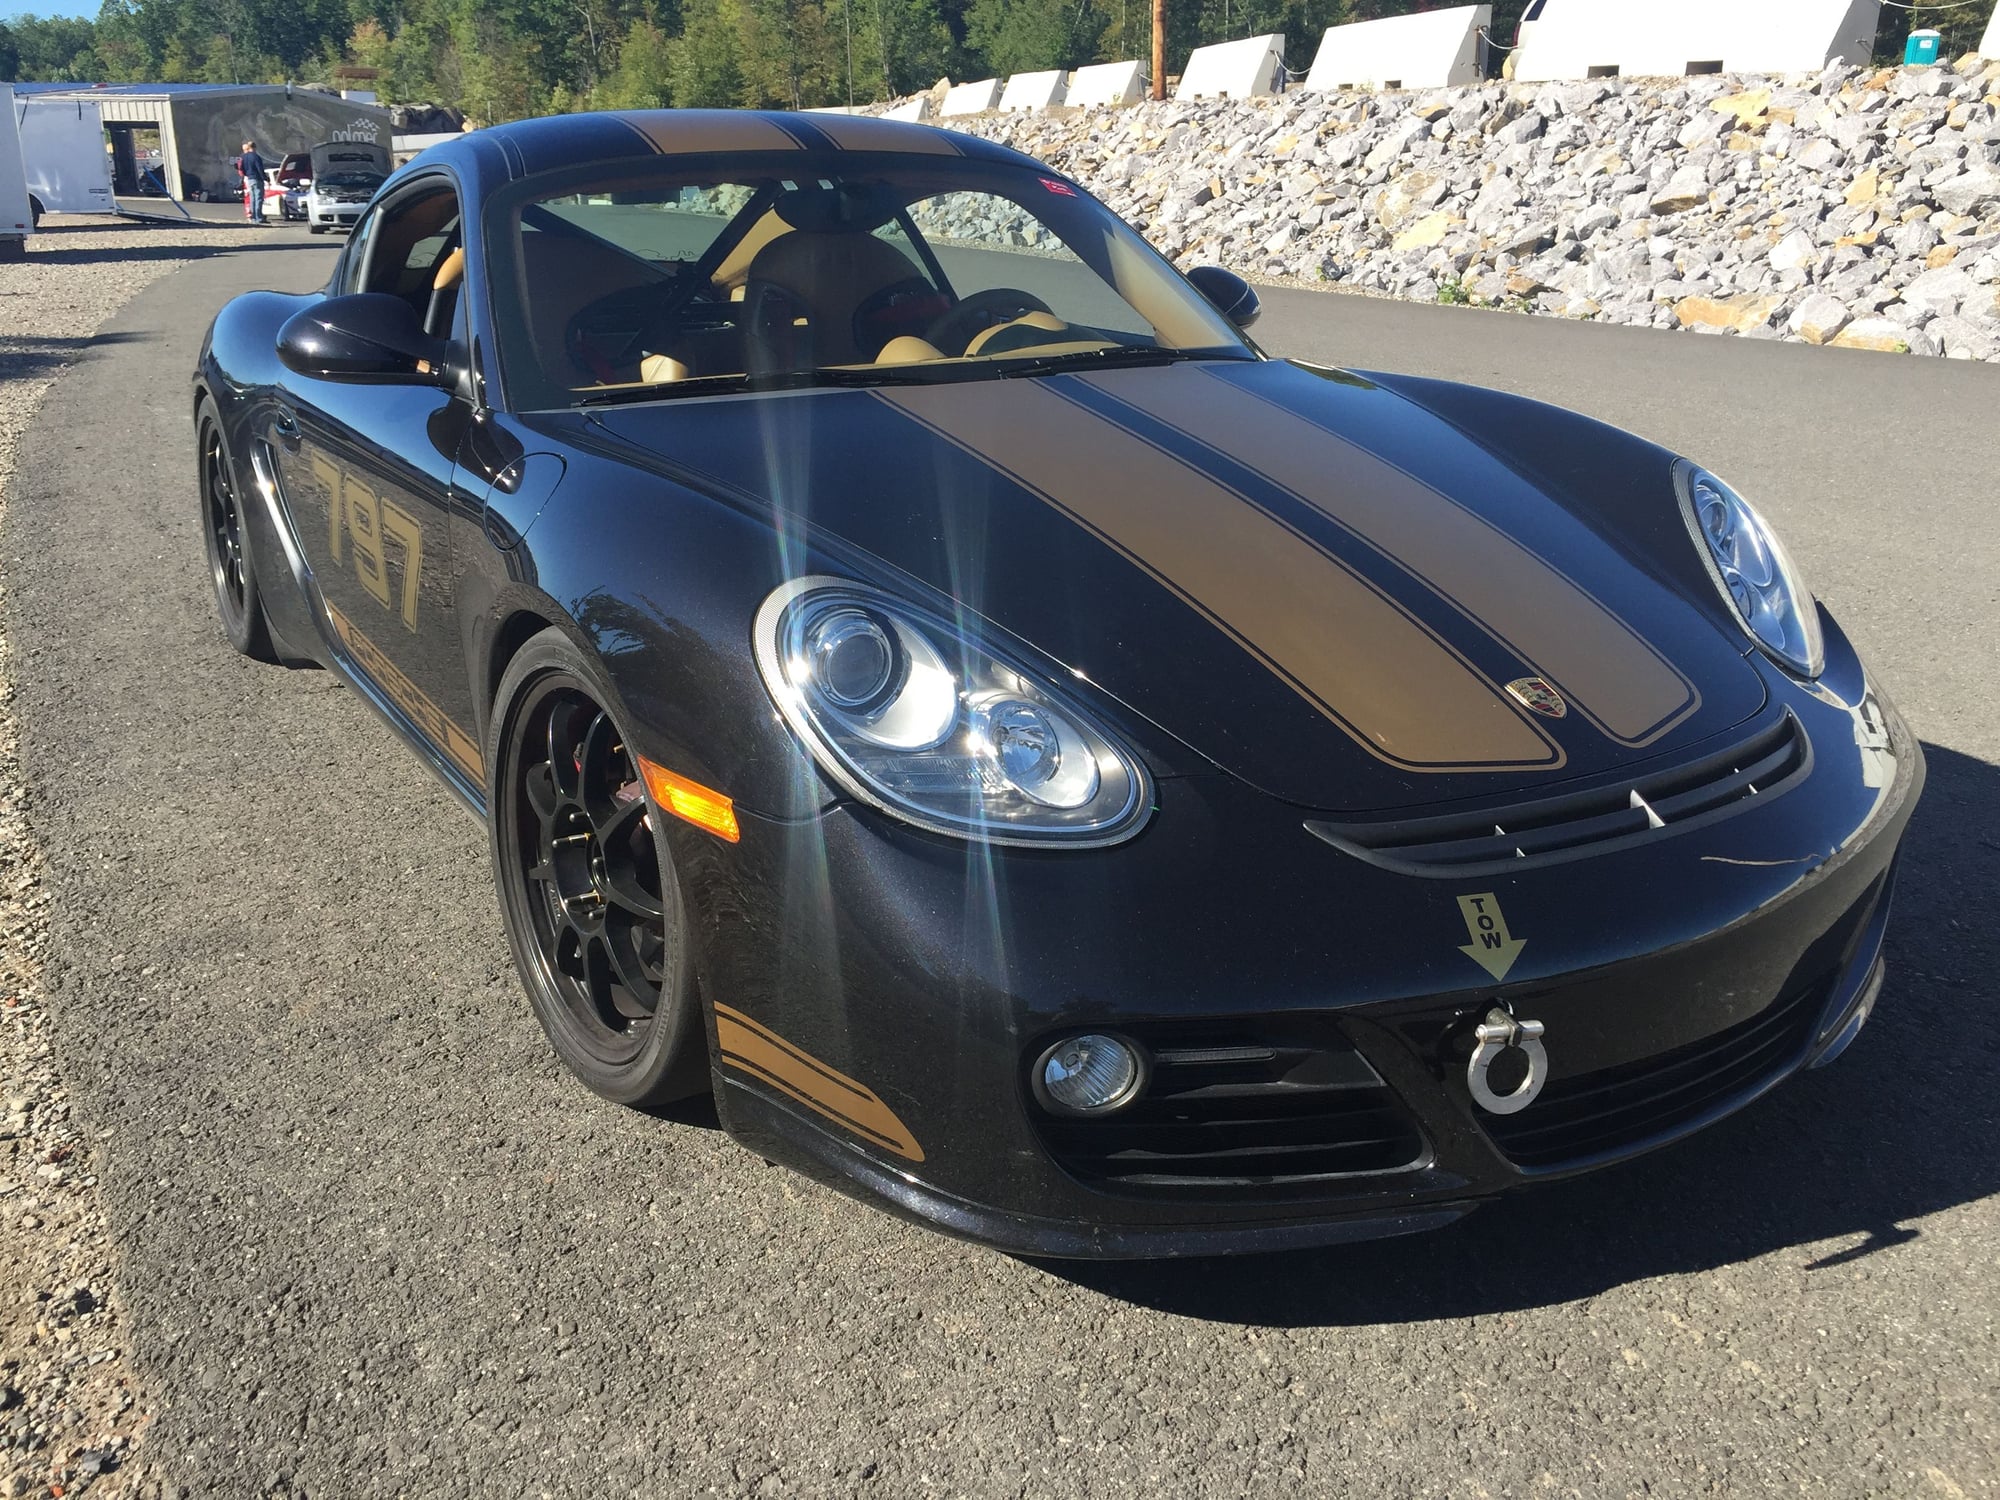 2009 Porsche Cayman - 2009 Porsche Cayman S PDK 987.2, Street-Legal, Track-Prepped, $100K+ invested - Used - VIN 2012041444 - 41,000 Miles - 6 cyl - 2WD - Automatic - Coupe - Black - Guilford, CT 06437, United States